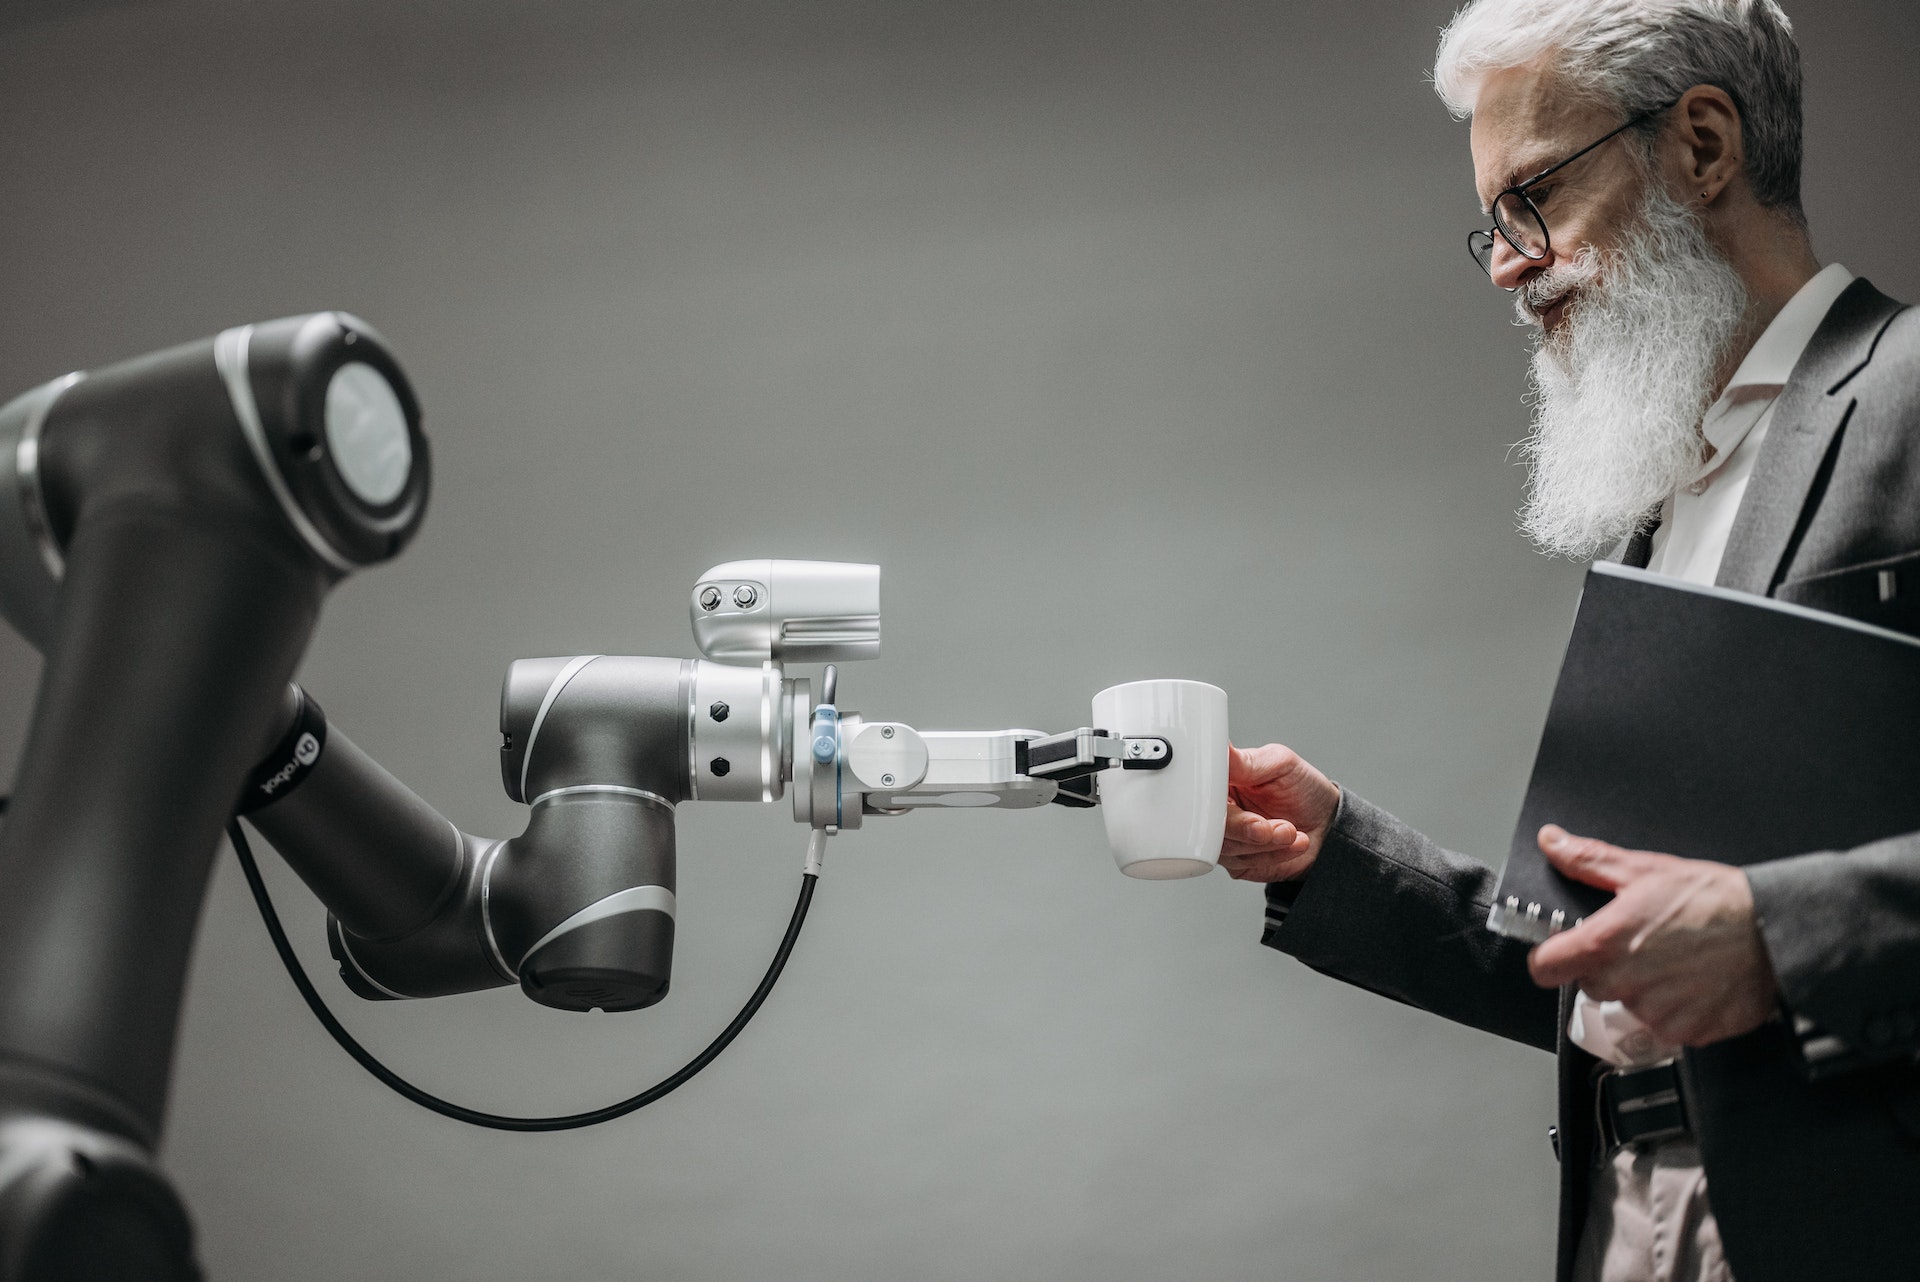  A robot arm using artificial intelligence to interact with a man